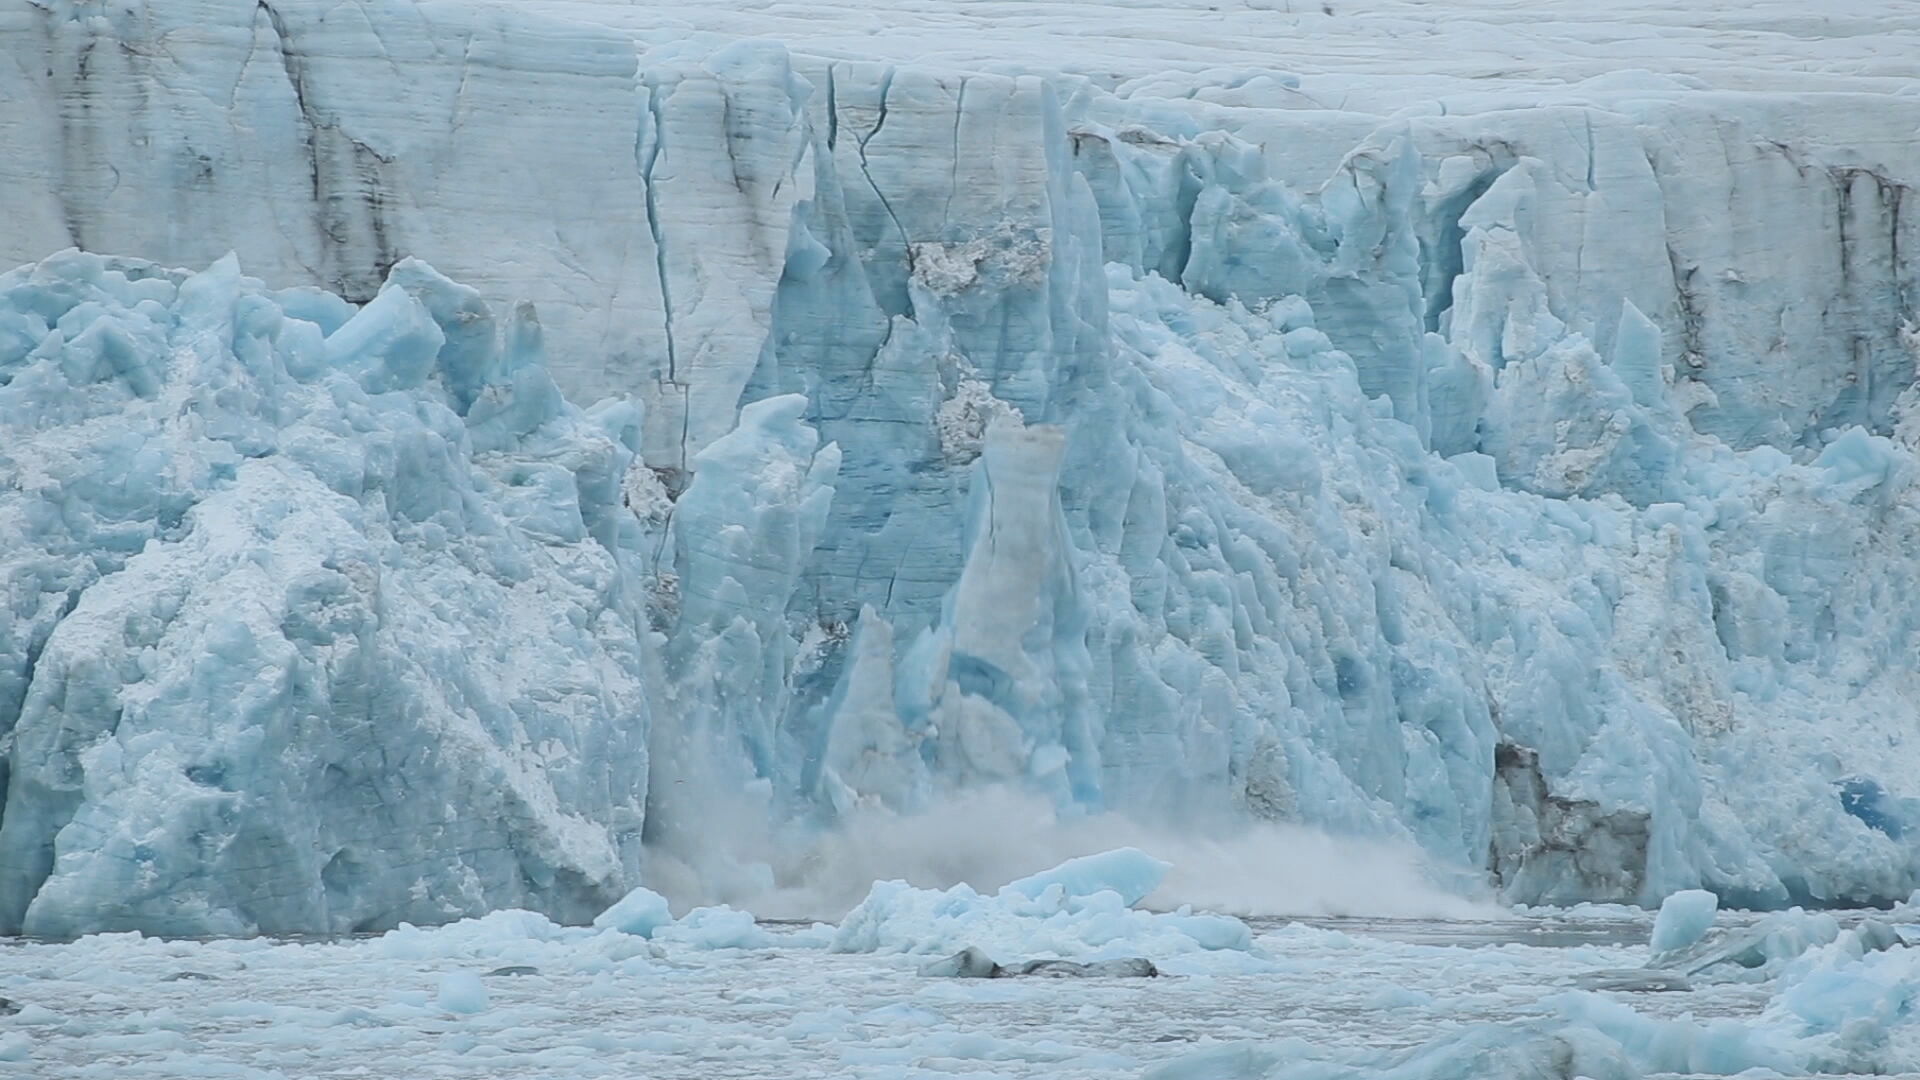 Melting ice shelves could see global sea levels rise by several metres